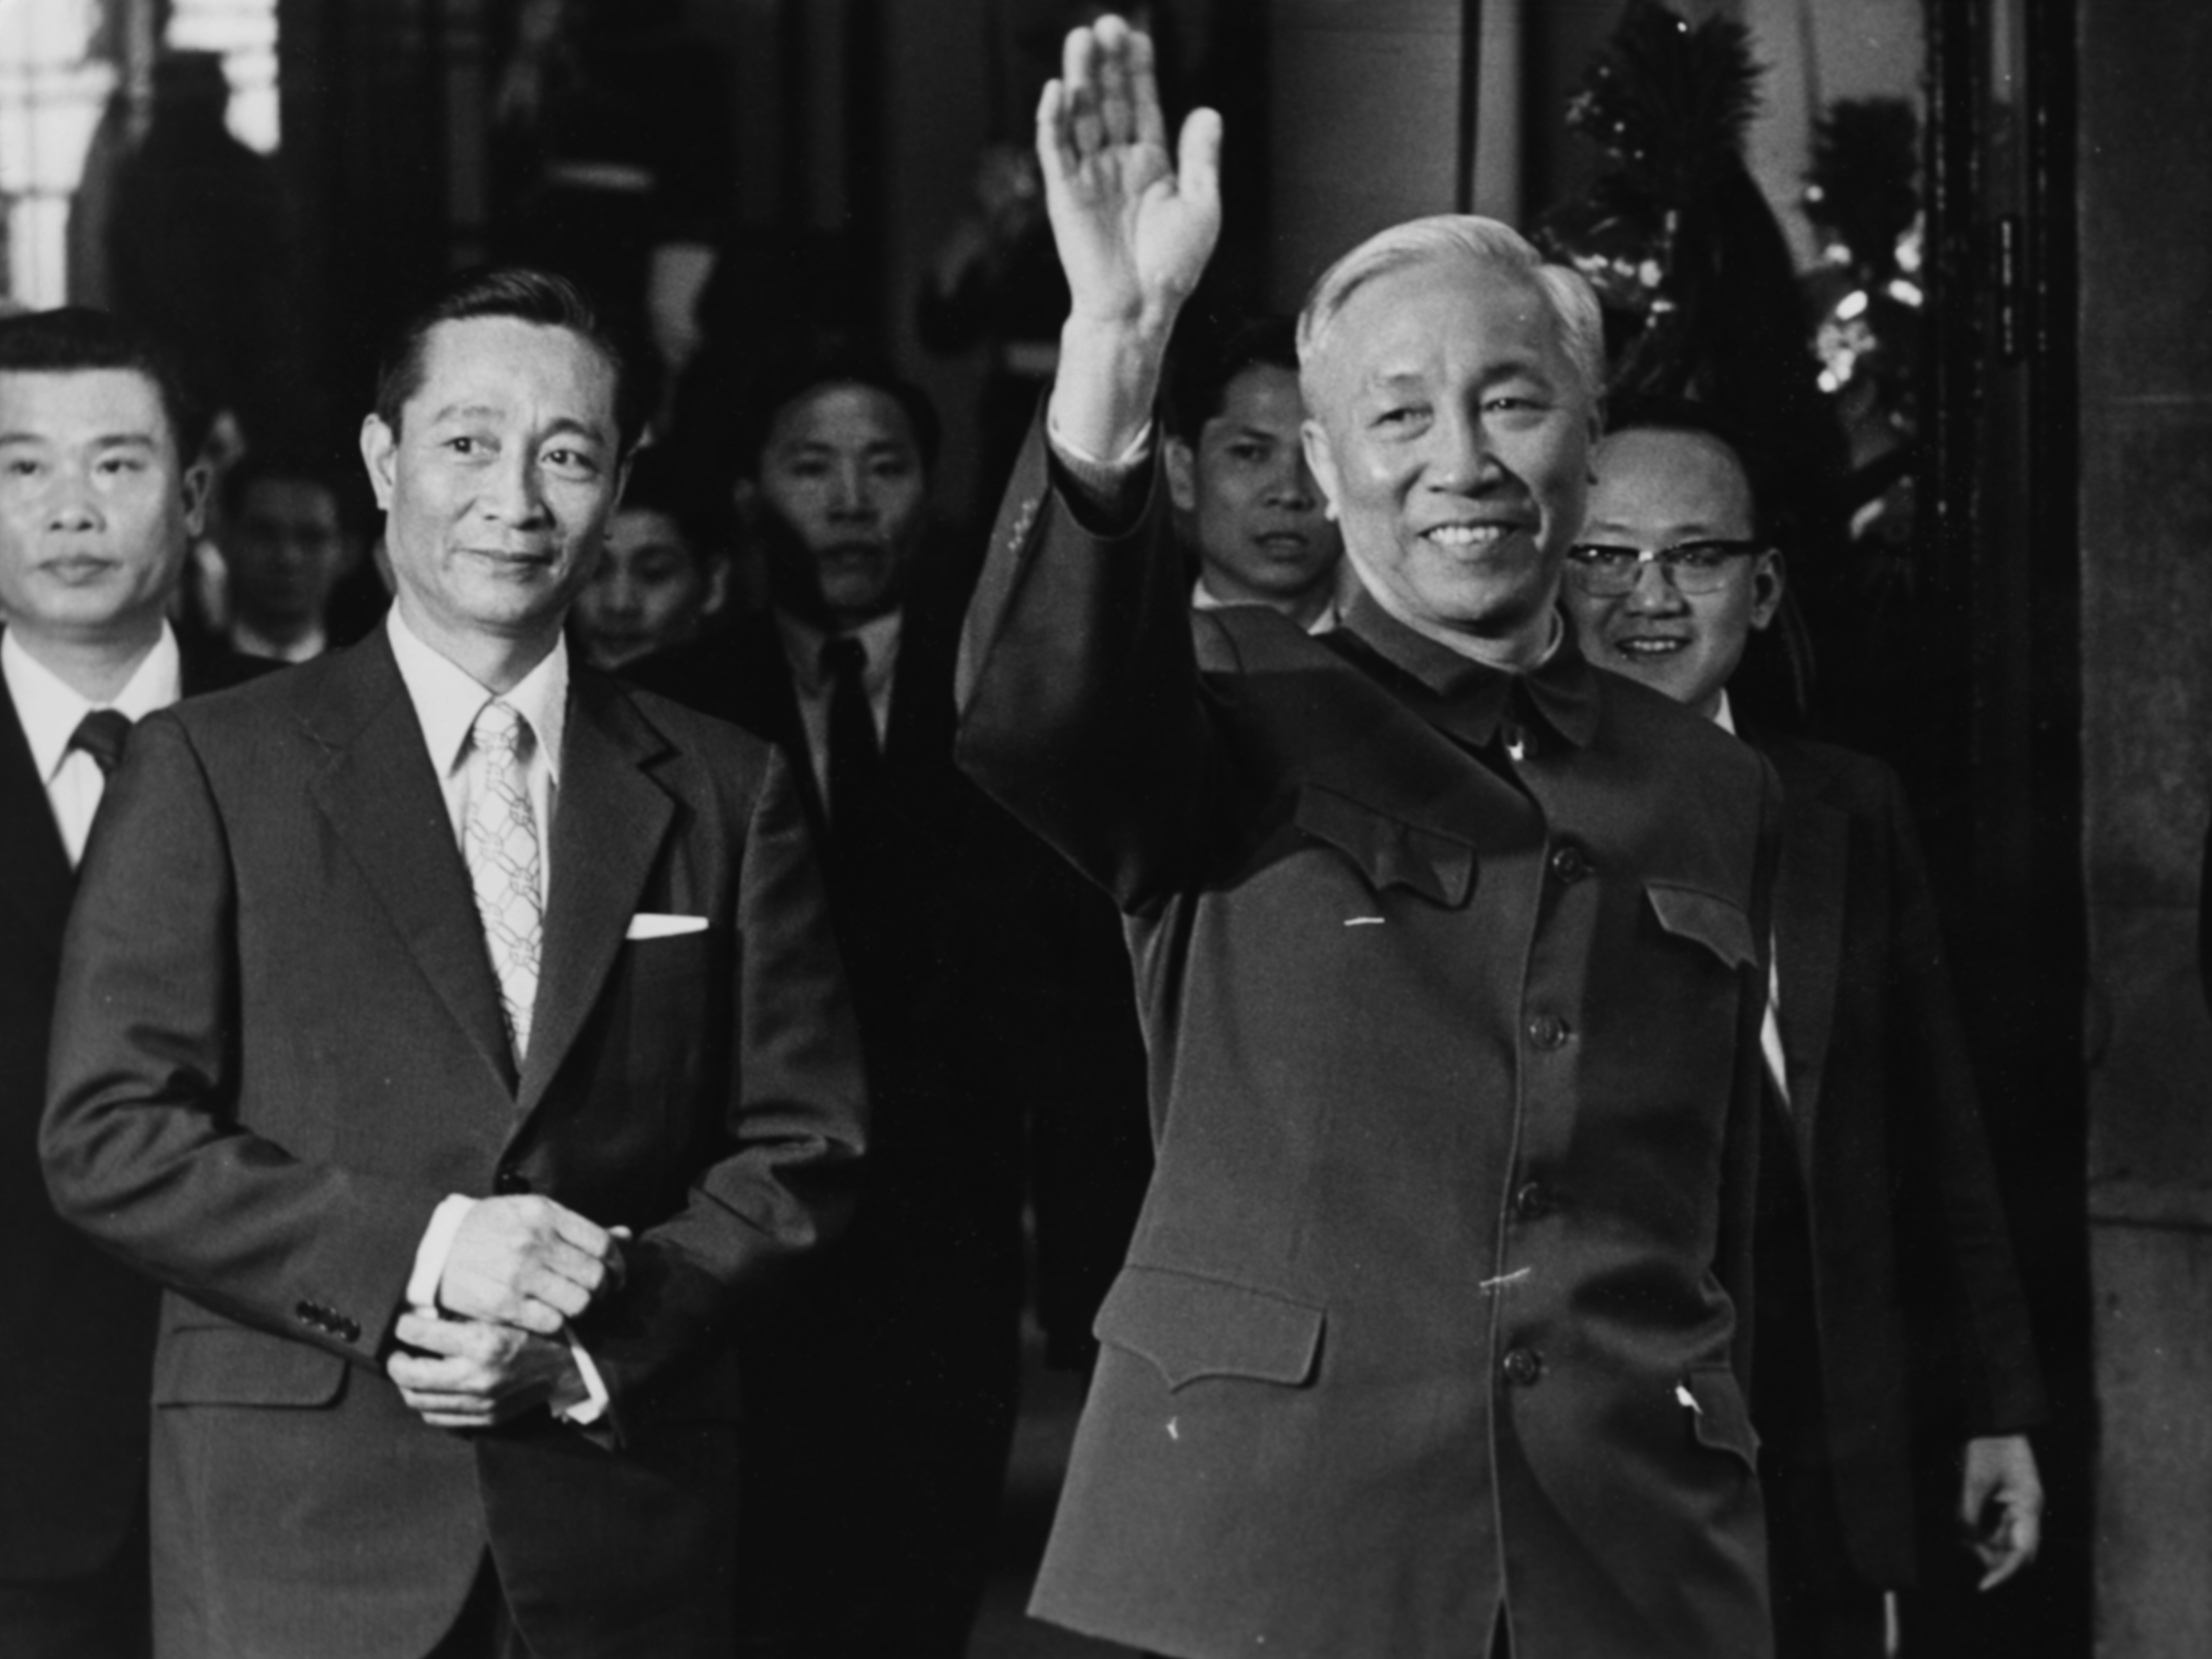 Vietnamese politician Le Duc Tho waving to photographers as he arrives at a conference in Paris, circa 1970. (Photo by Keystone/Hulton Archive/Getty Images)